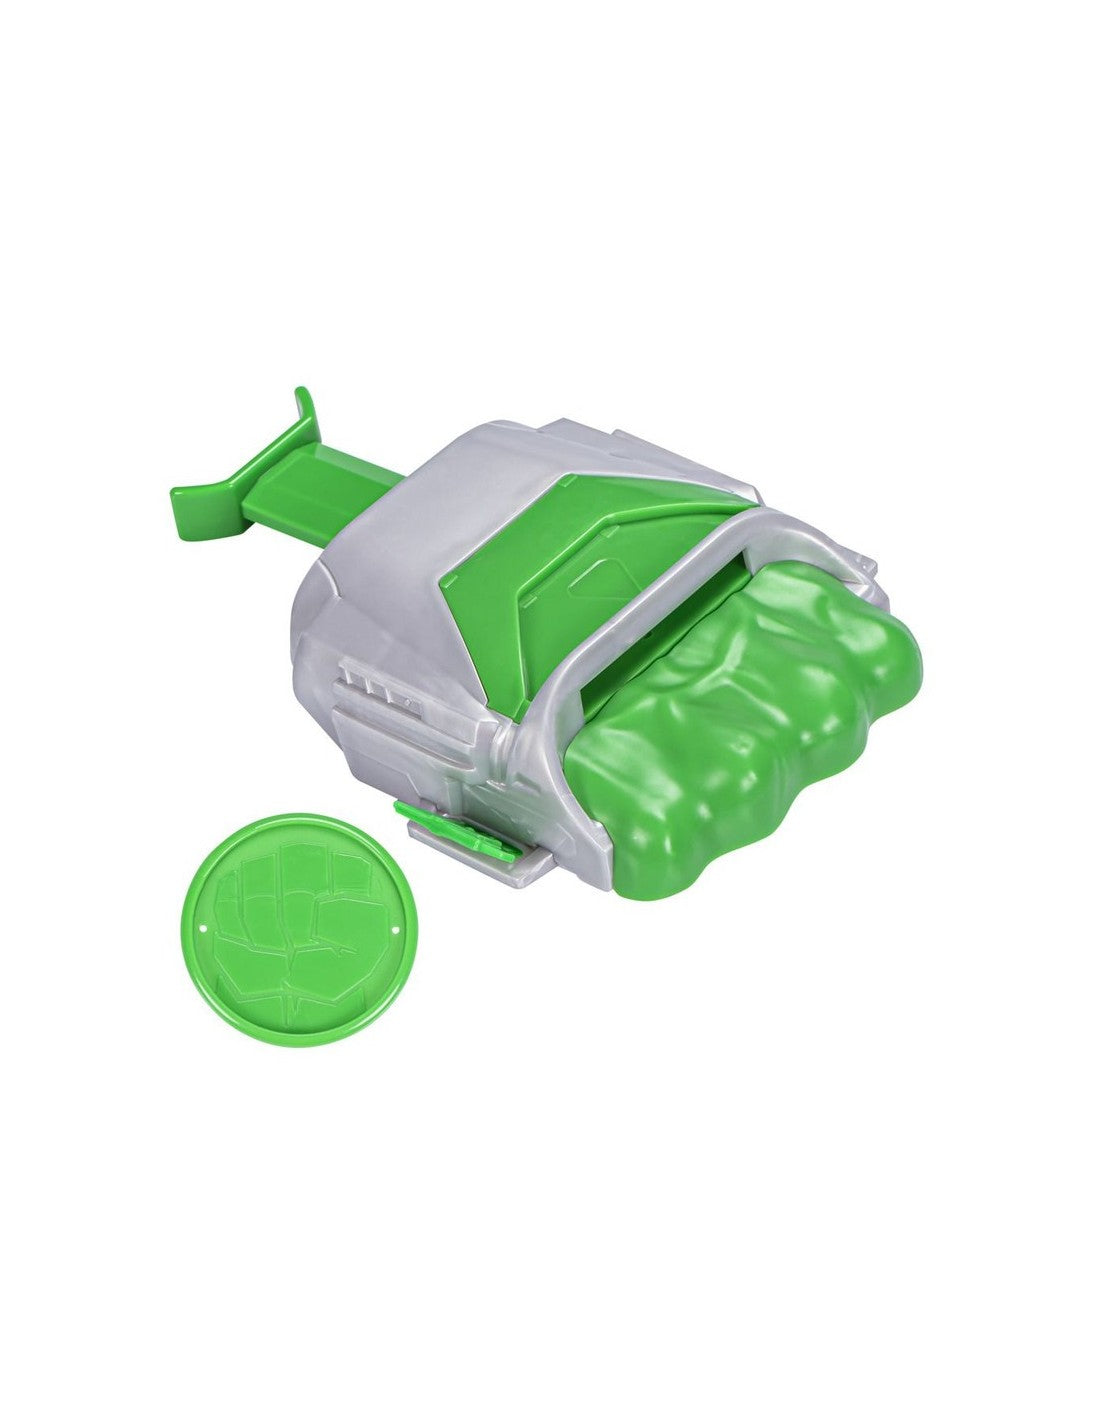 Marvel Collectible High-Quality Plastic Comic-Inspired Hulk Gamma Blaster Green and Grey